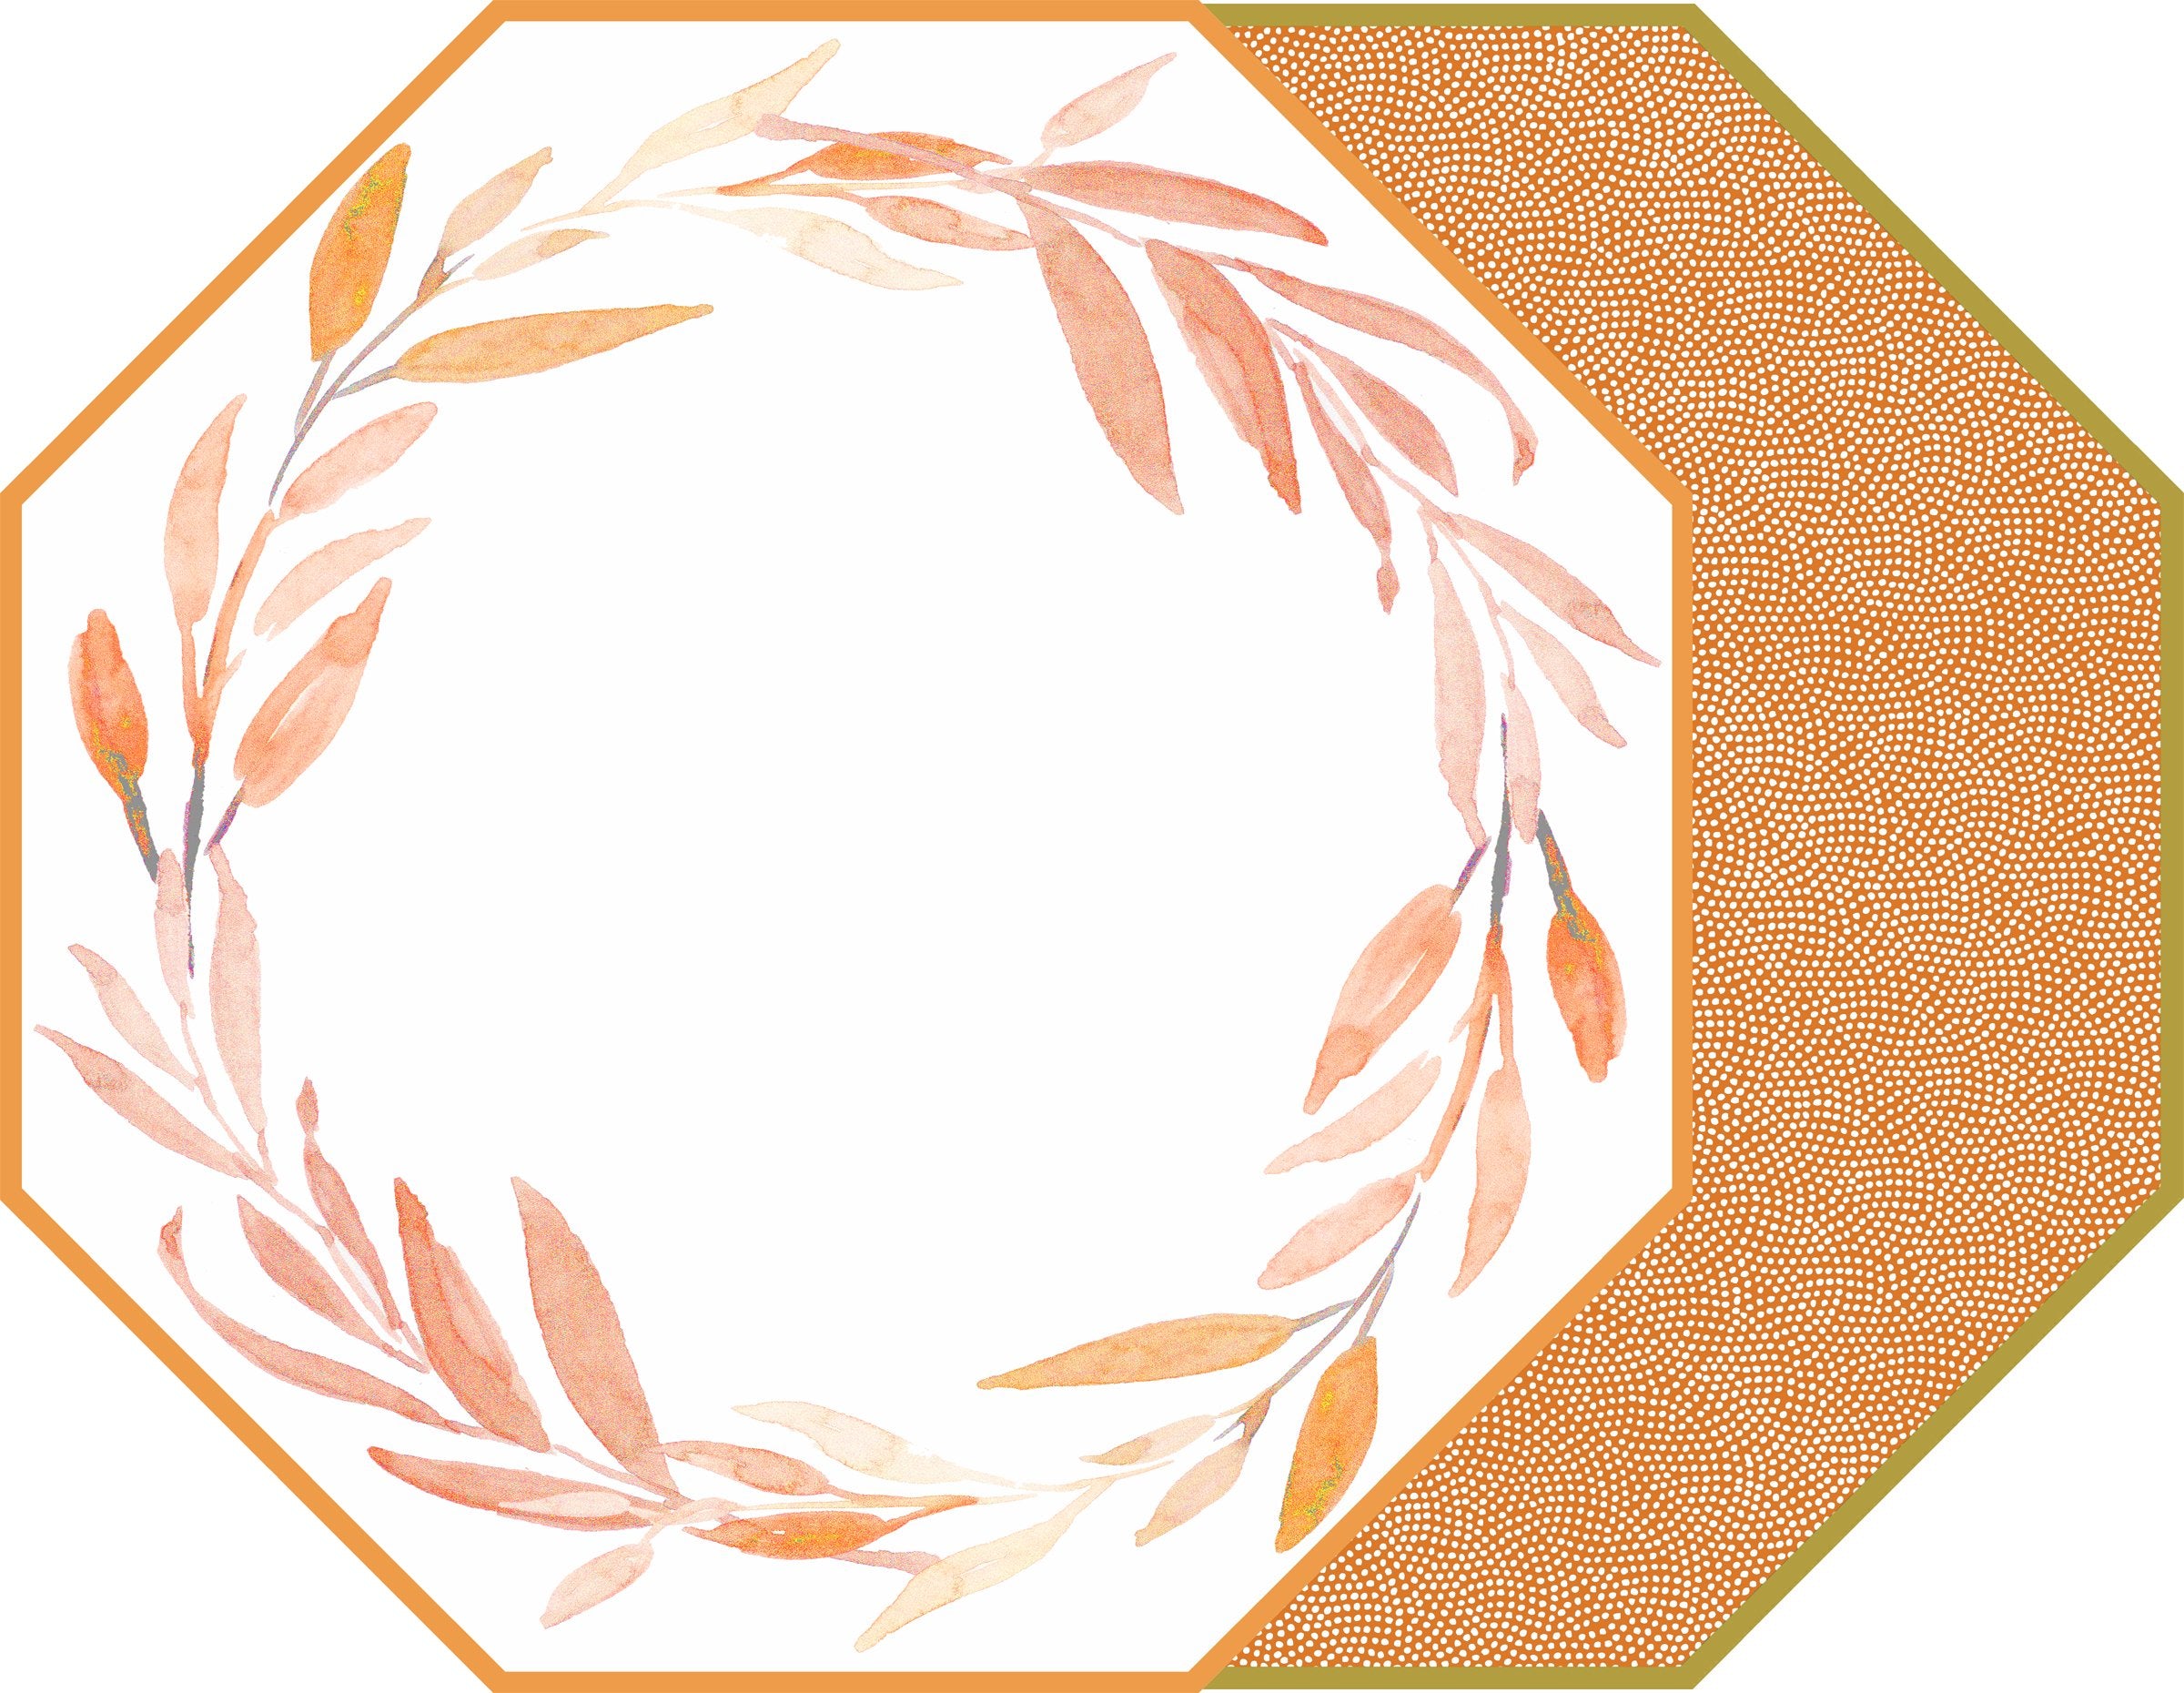 2-Sided Wreath Octagonal Placemat - Paprika